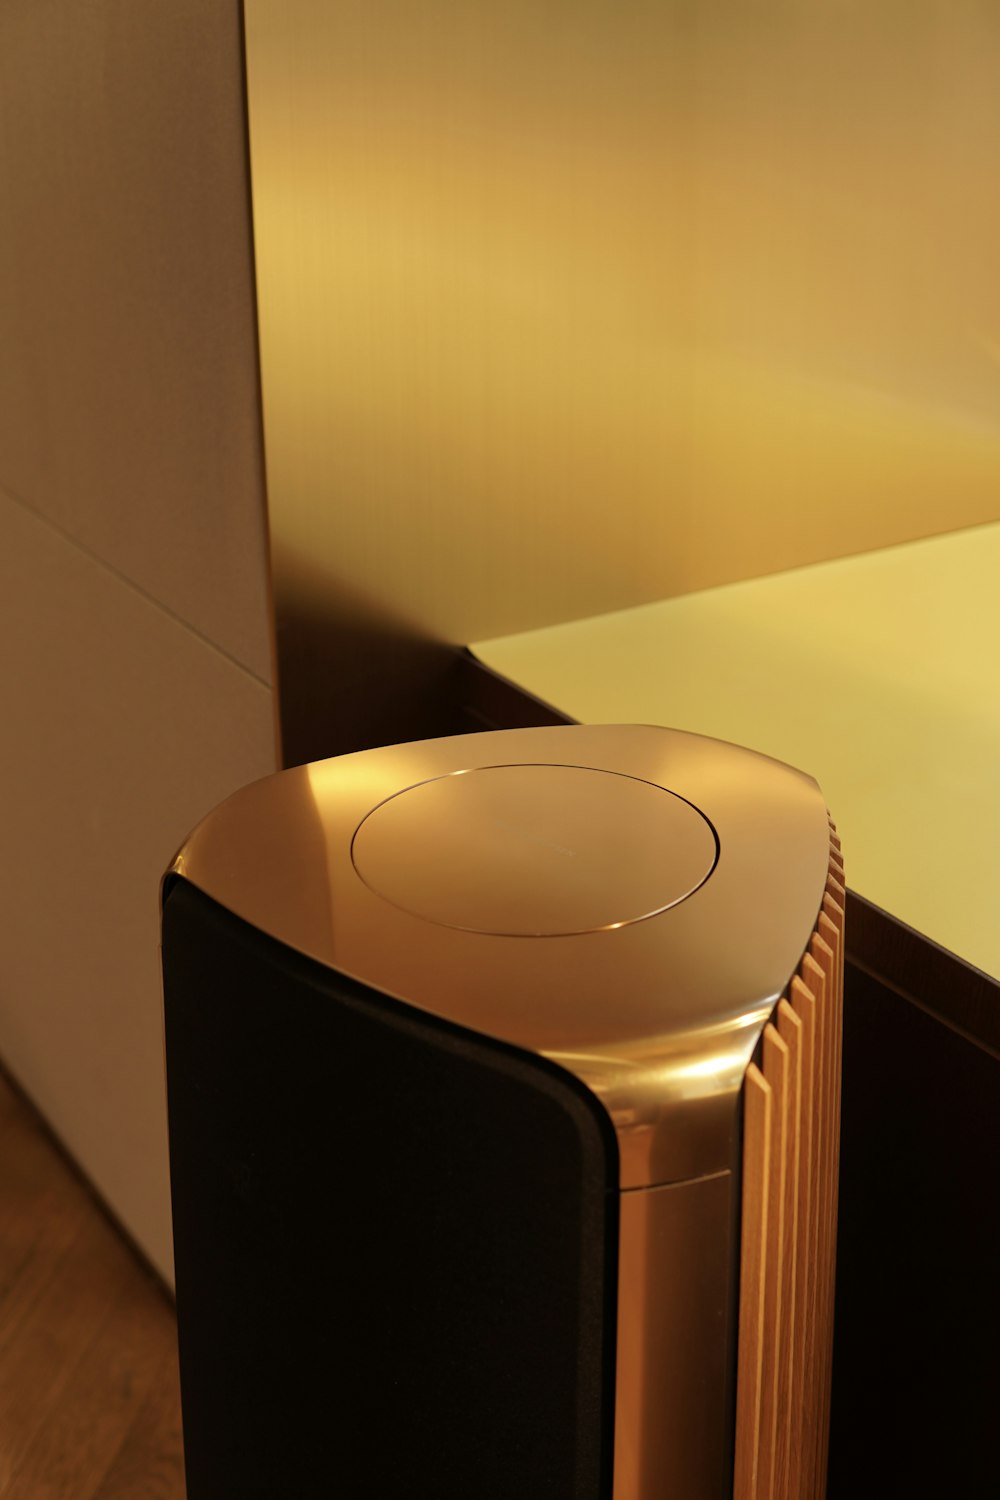 a gold and black speaker sitting on top of a wooden floor